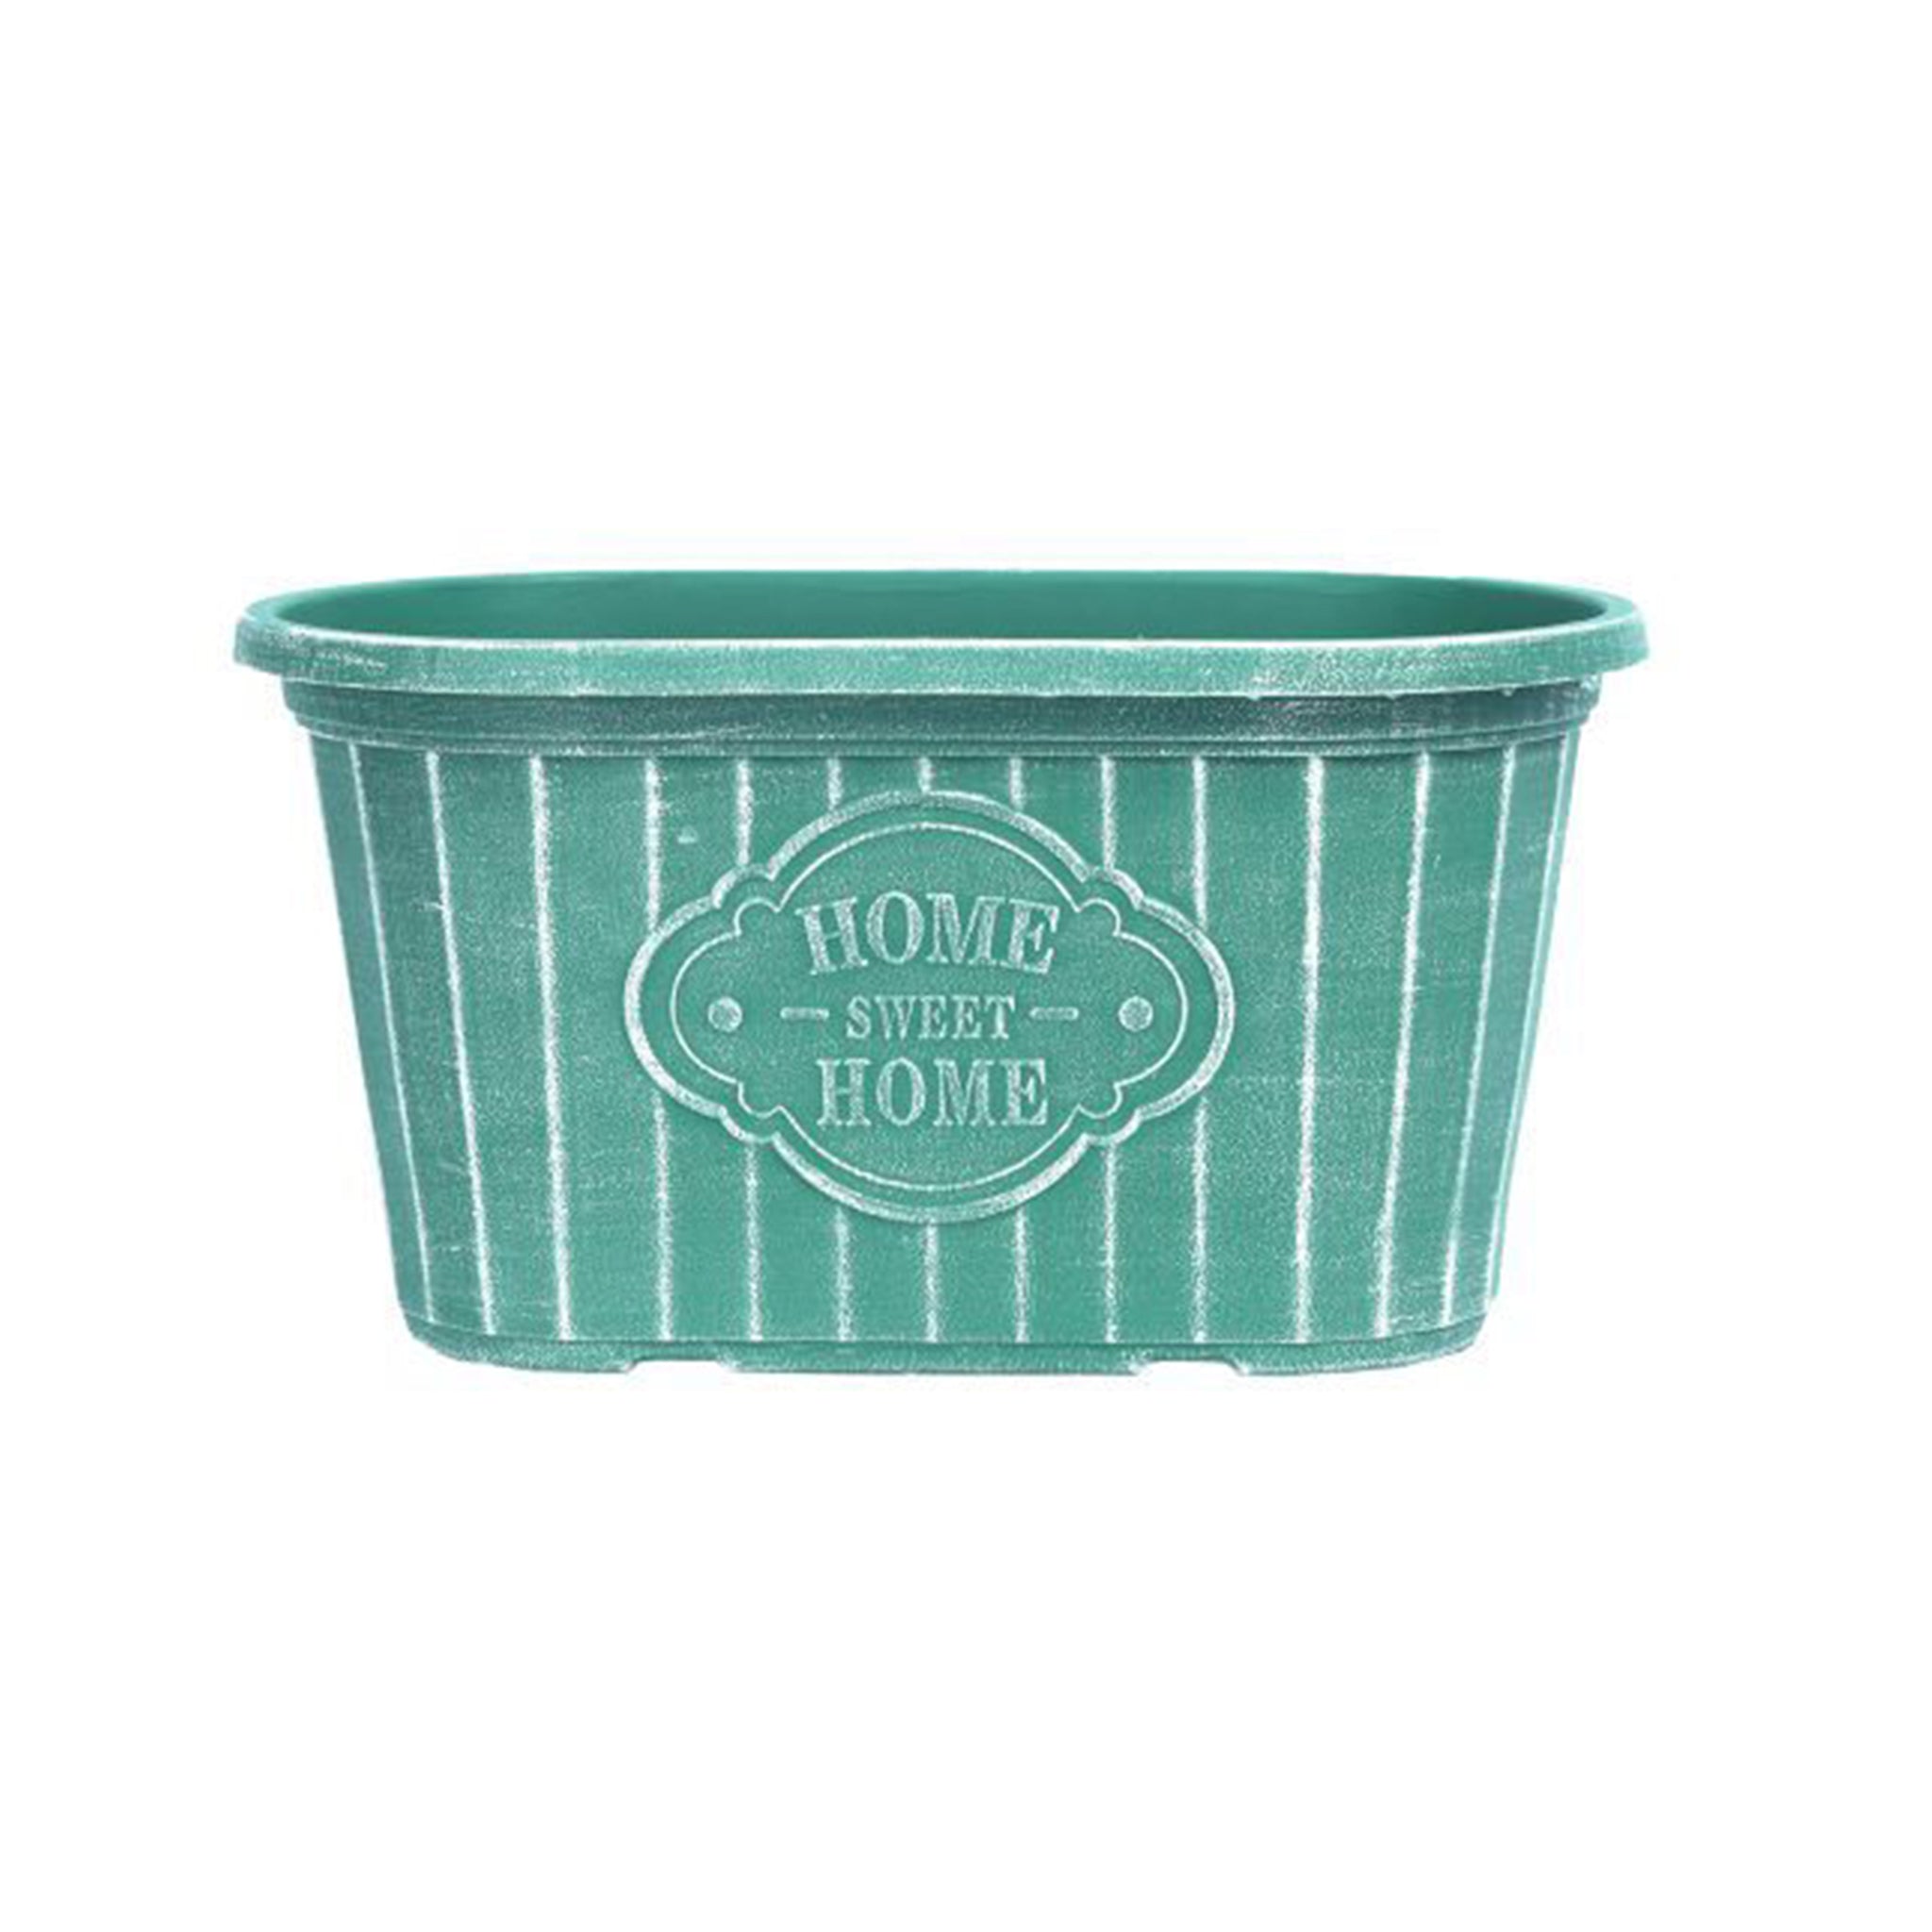 Home Sweet Home Oval 29cm Planter - Teal